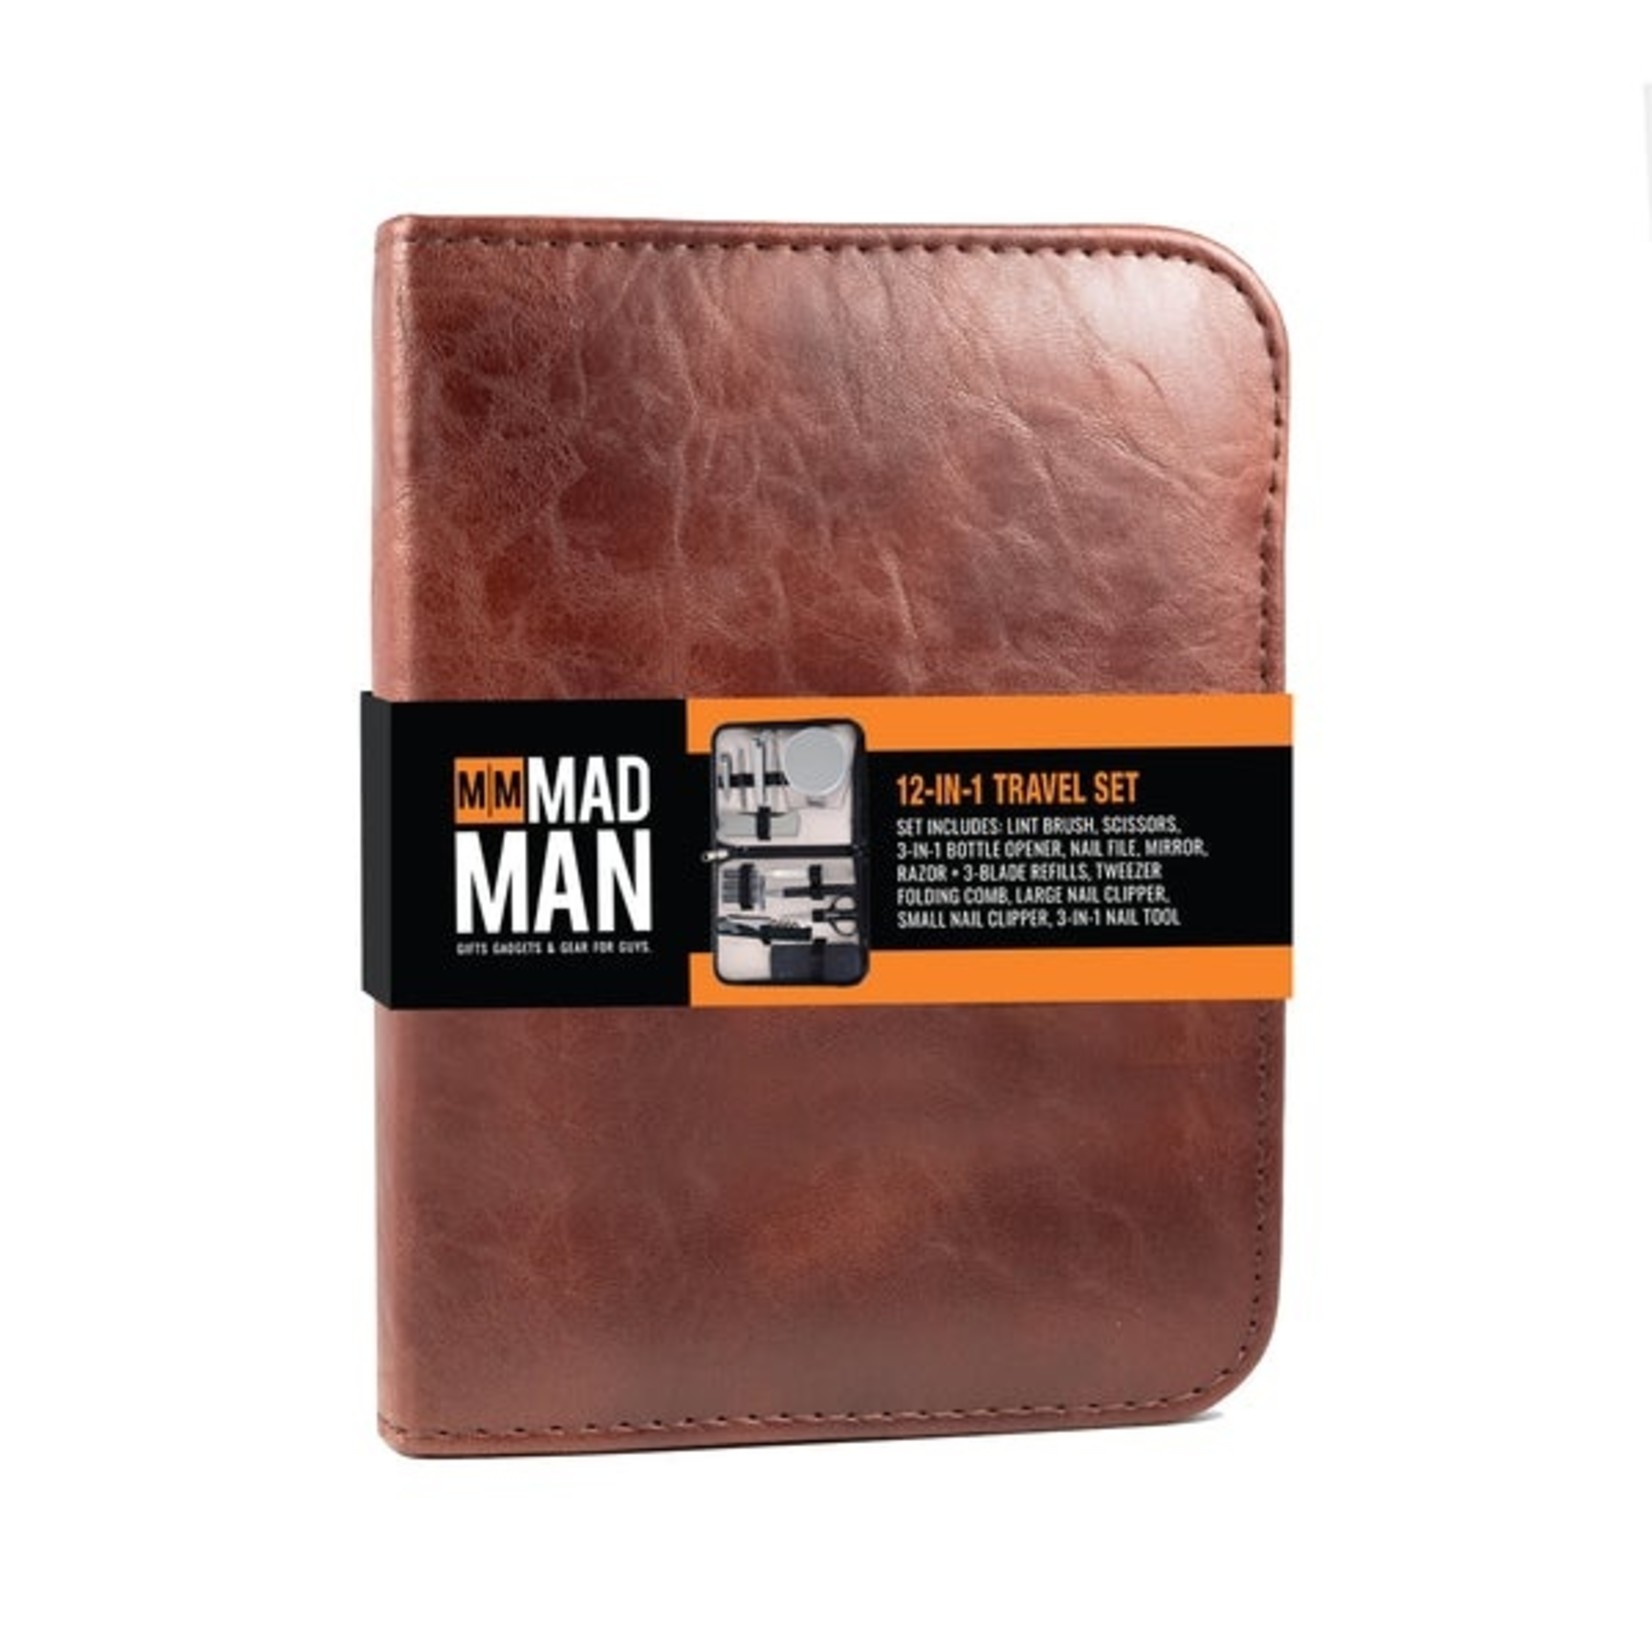 Mad Man Mr. On the Move 12-In-1 Travel Set